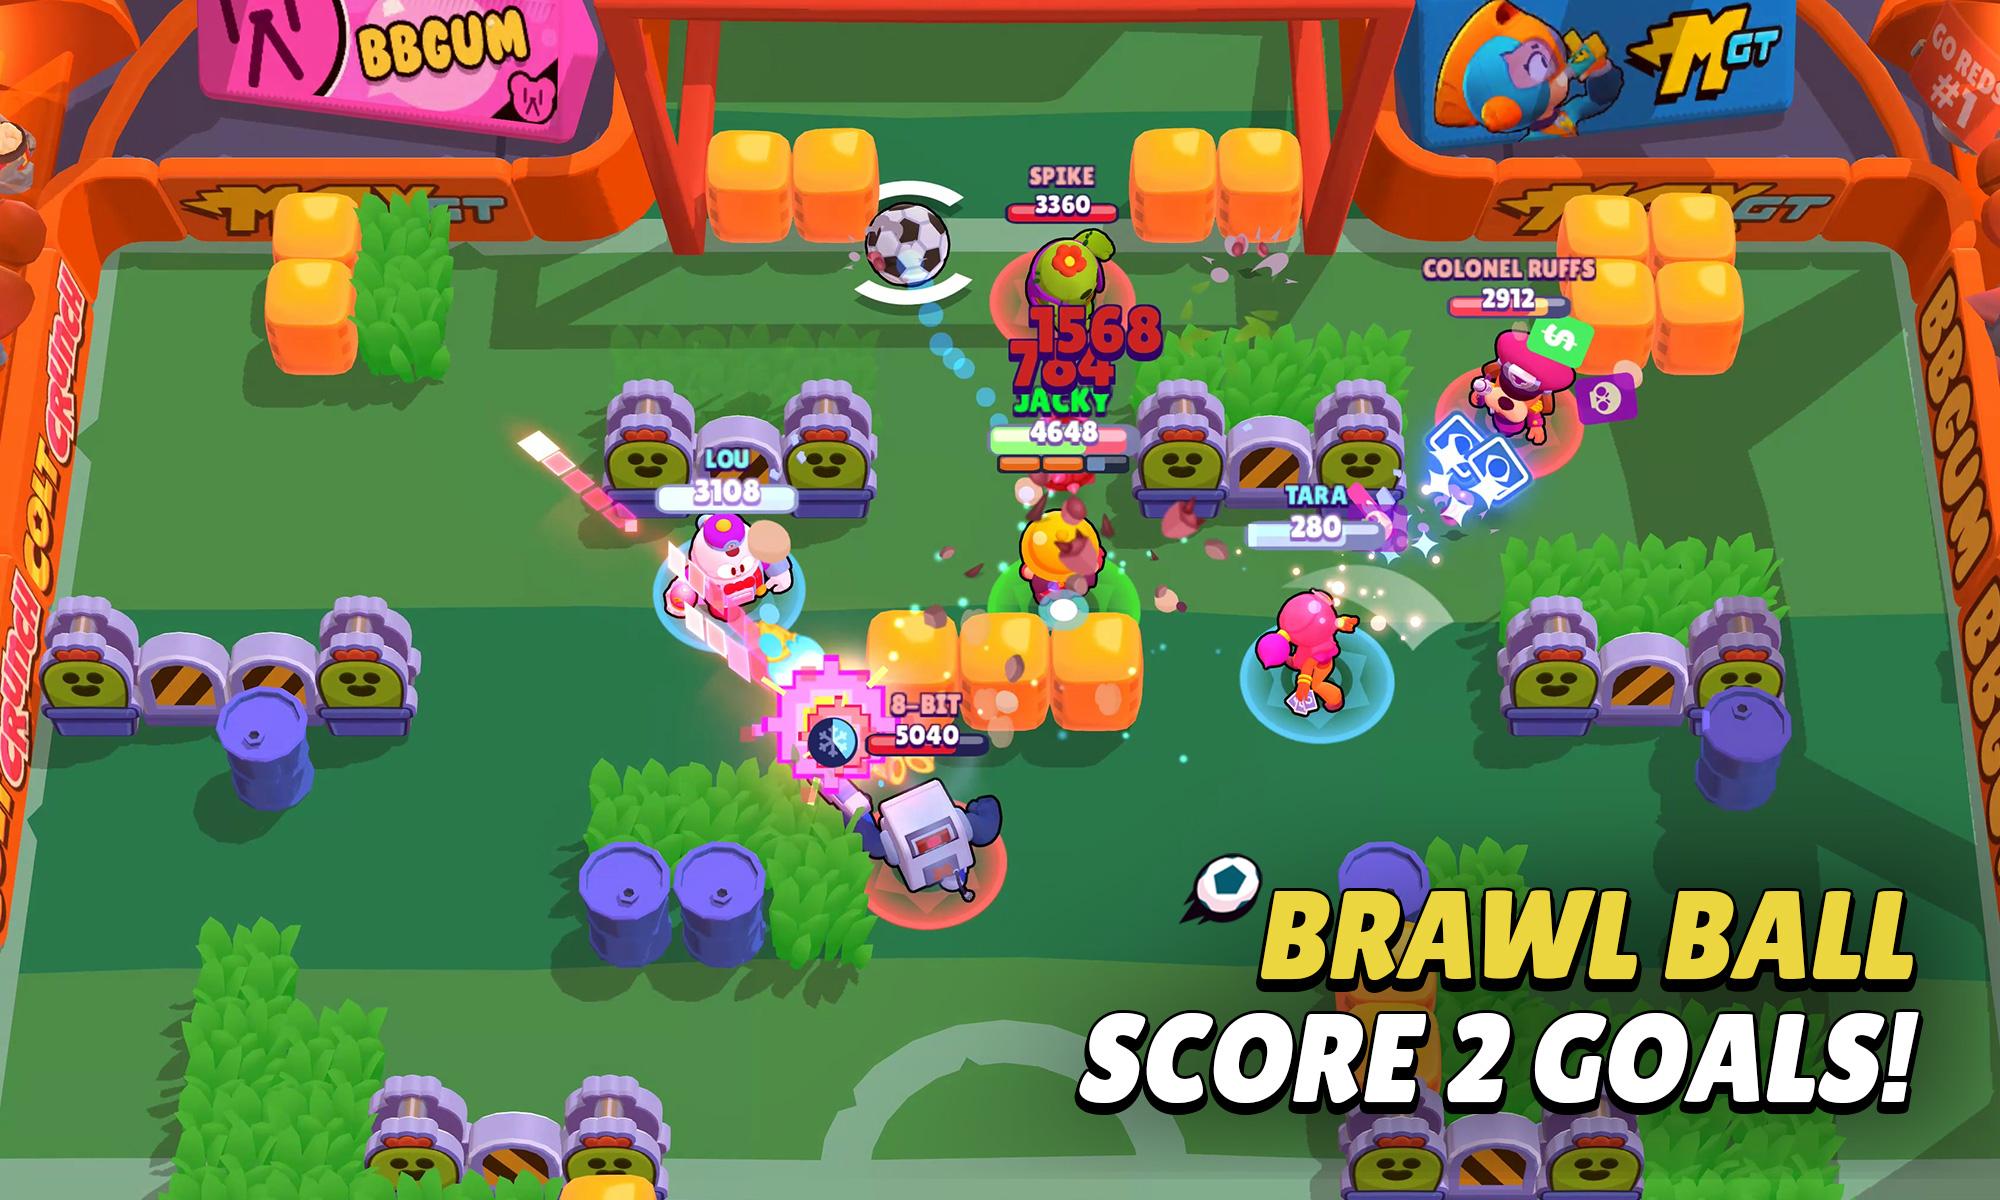 Brawl Stars Apk Download Pick Up Your Hero Characters In 3v3 Smash And Grab Mode Brock Shelly Jessie And Barley - apkpure brawl stars android